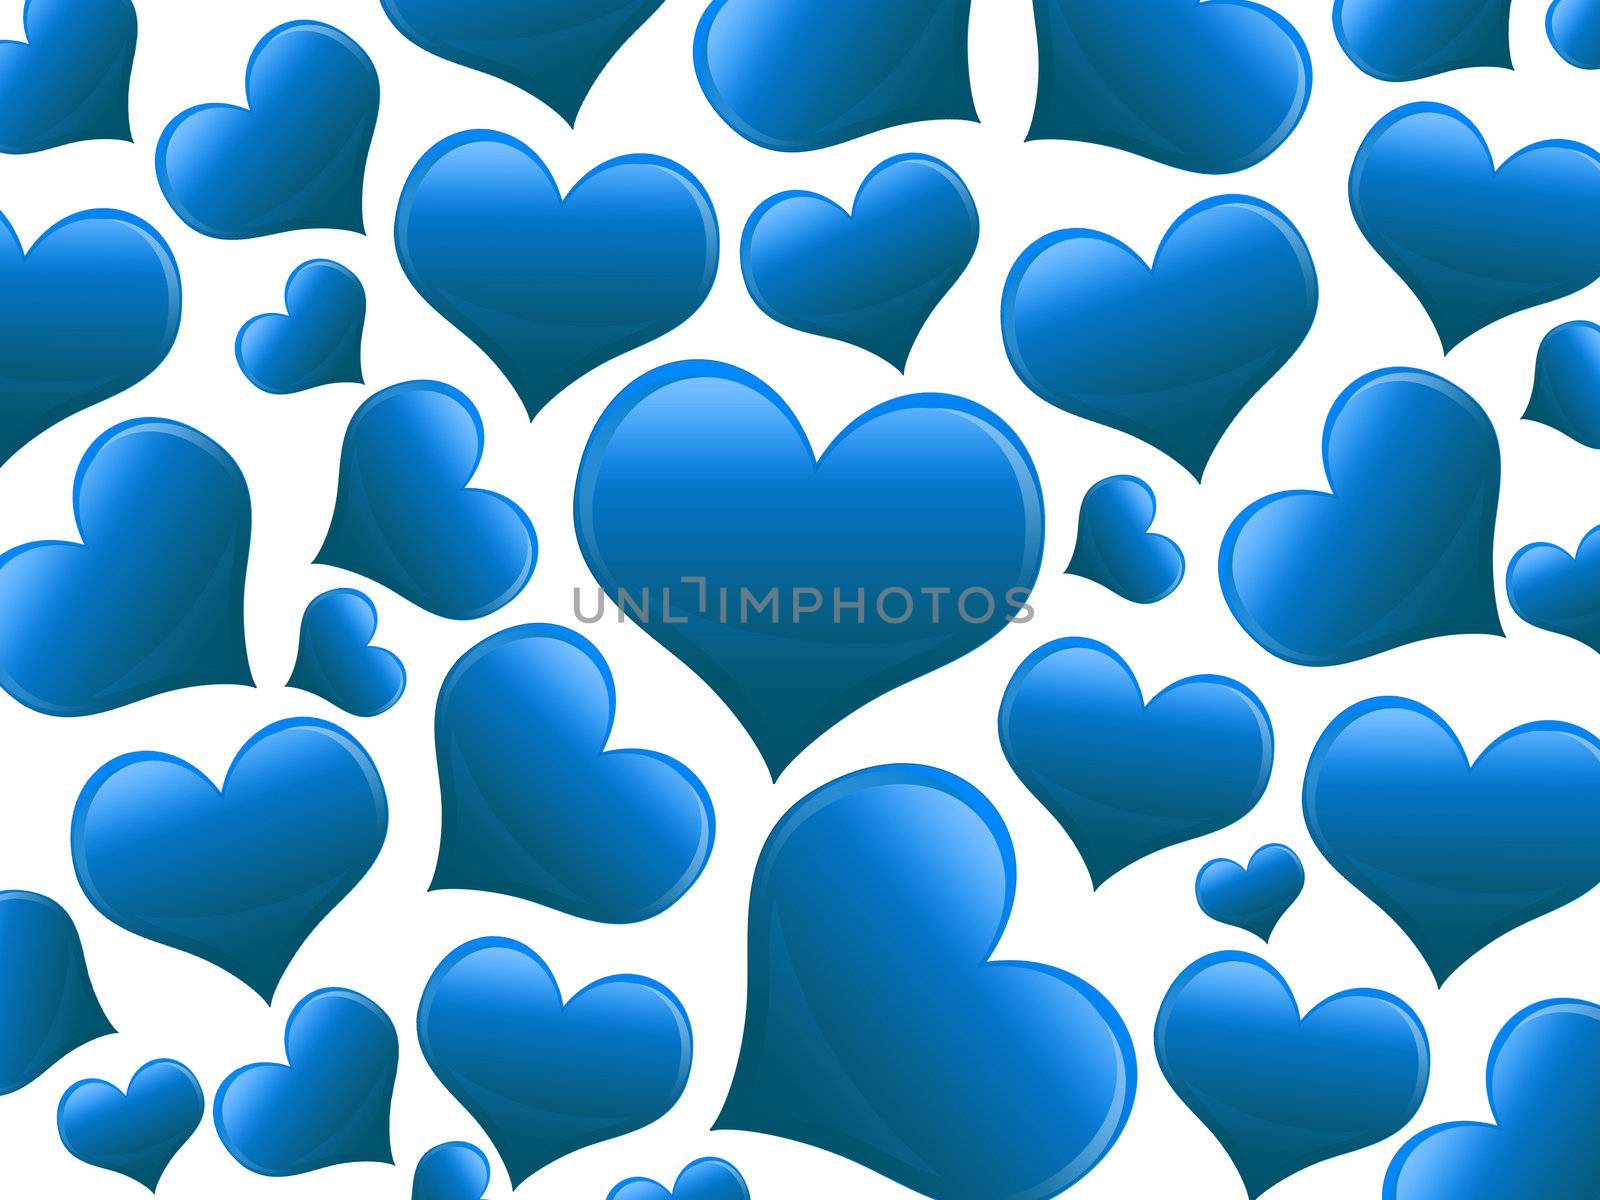 Valentines Day Card with Hearts all in blue